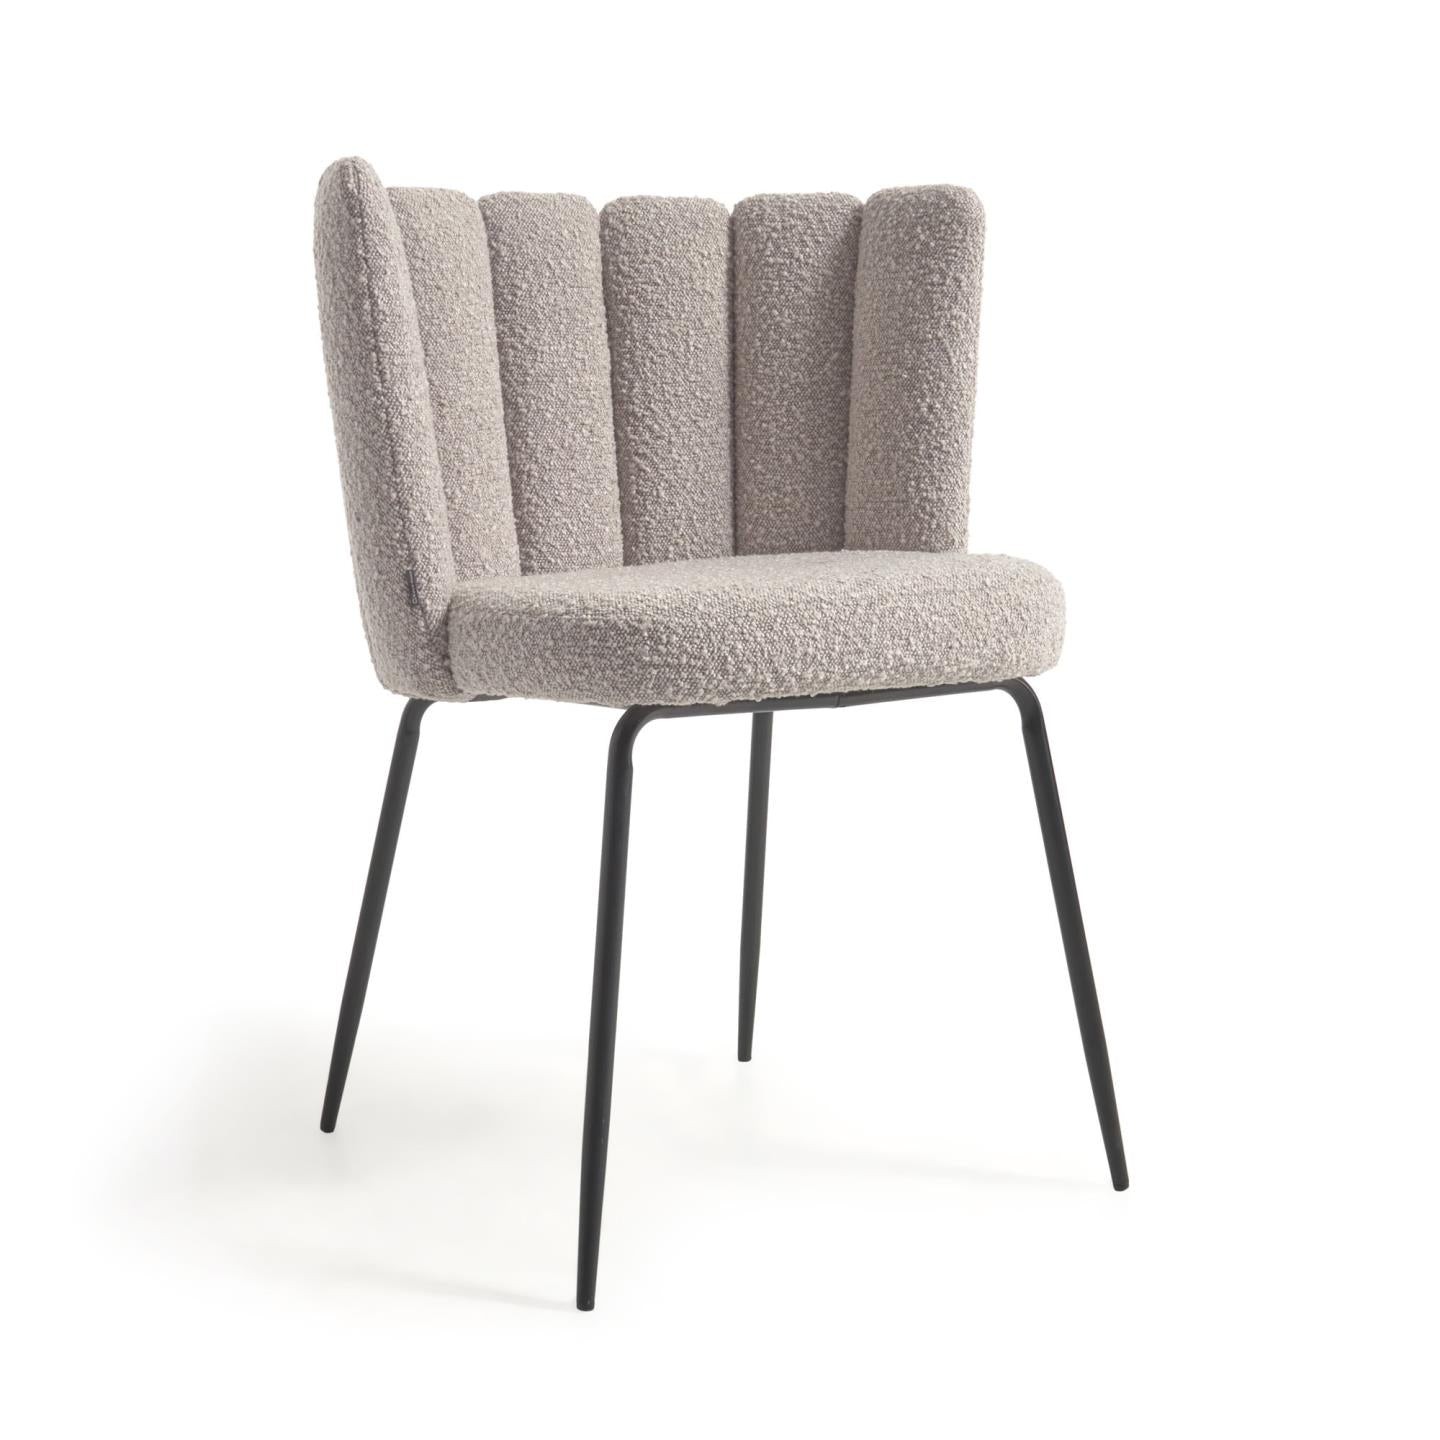 Aniela chair in gray bouclé and metal finish with black finish FR